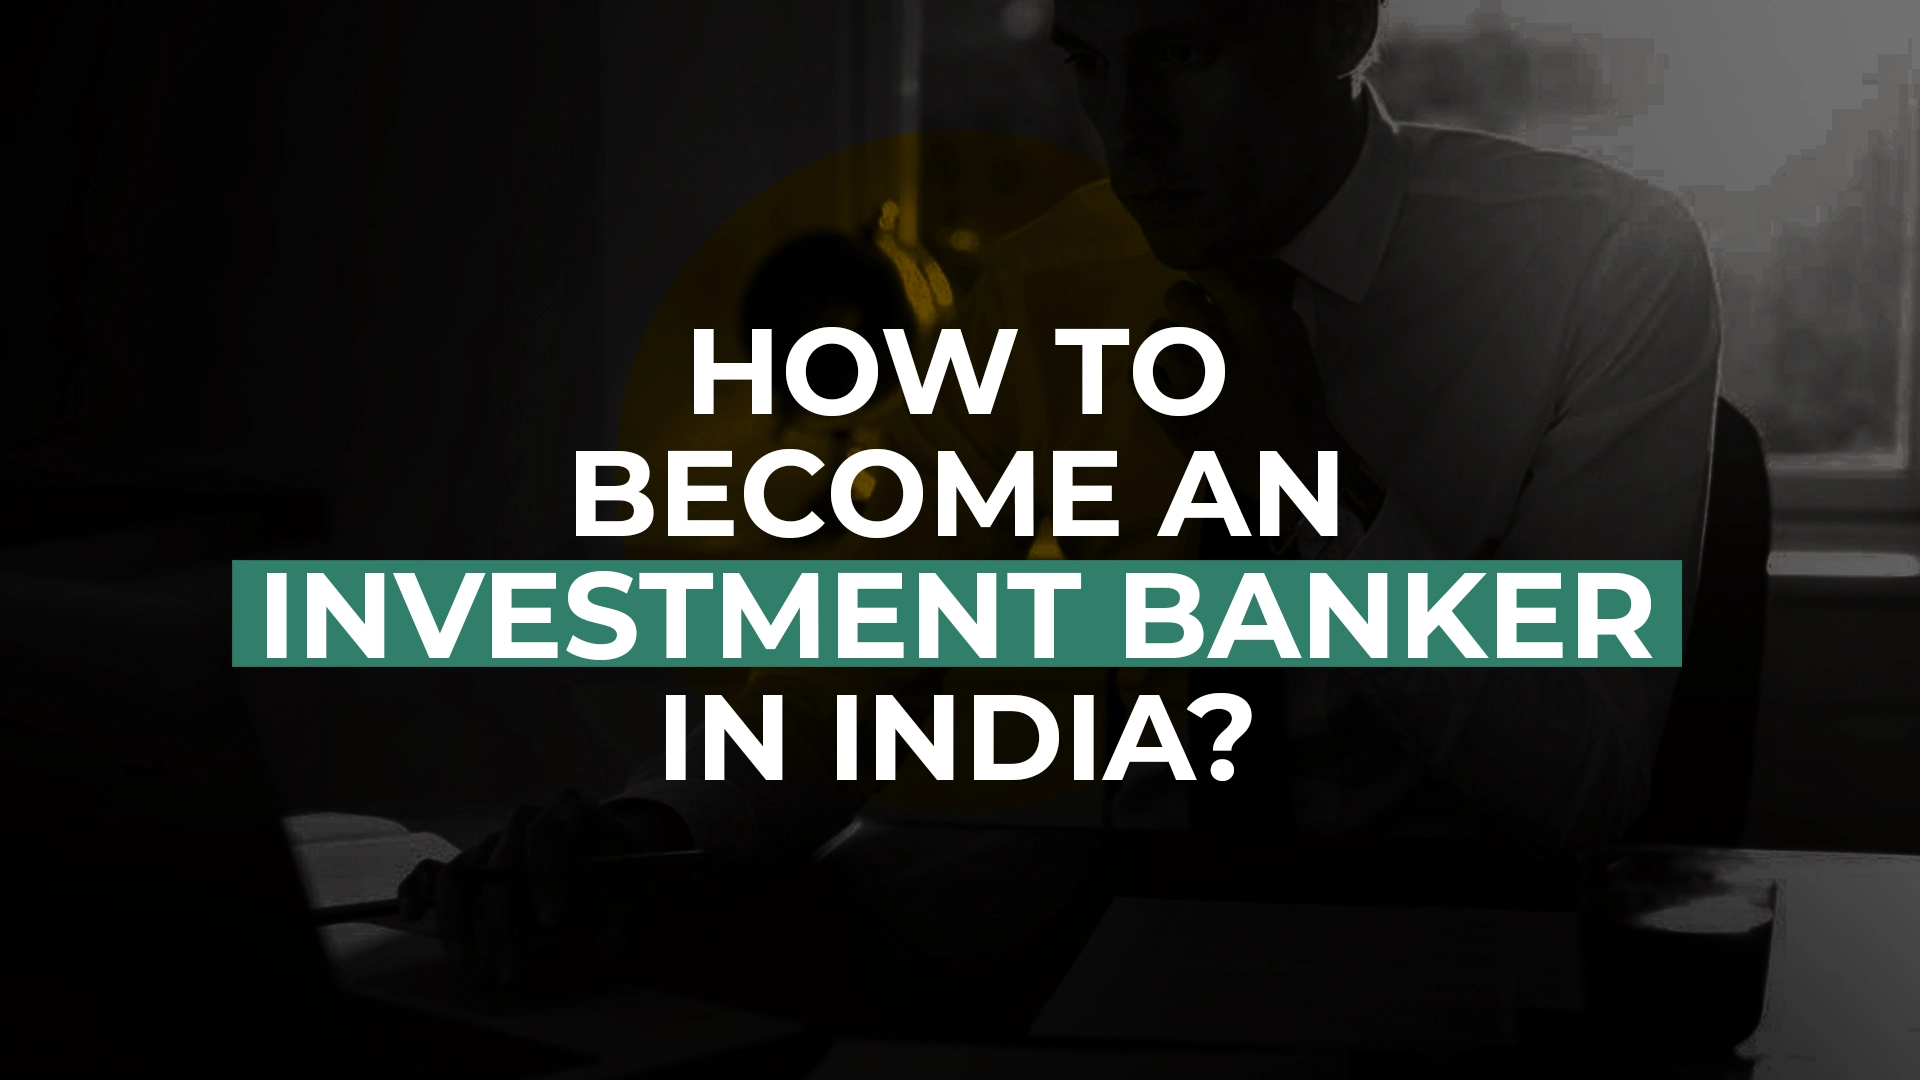 How to Become an Investment Banker in India